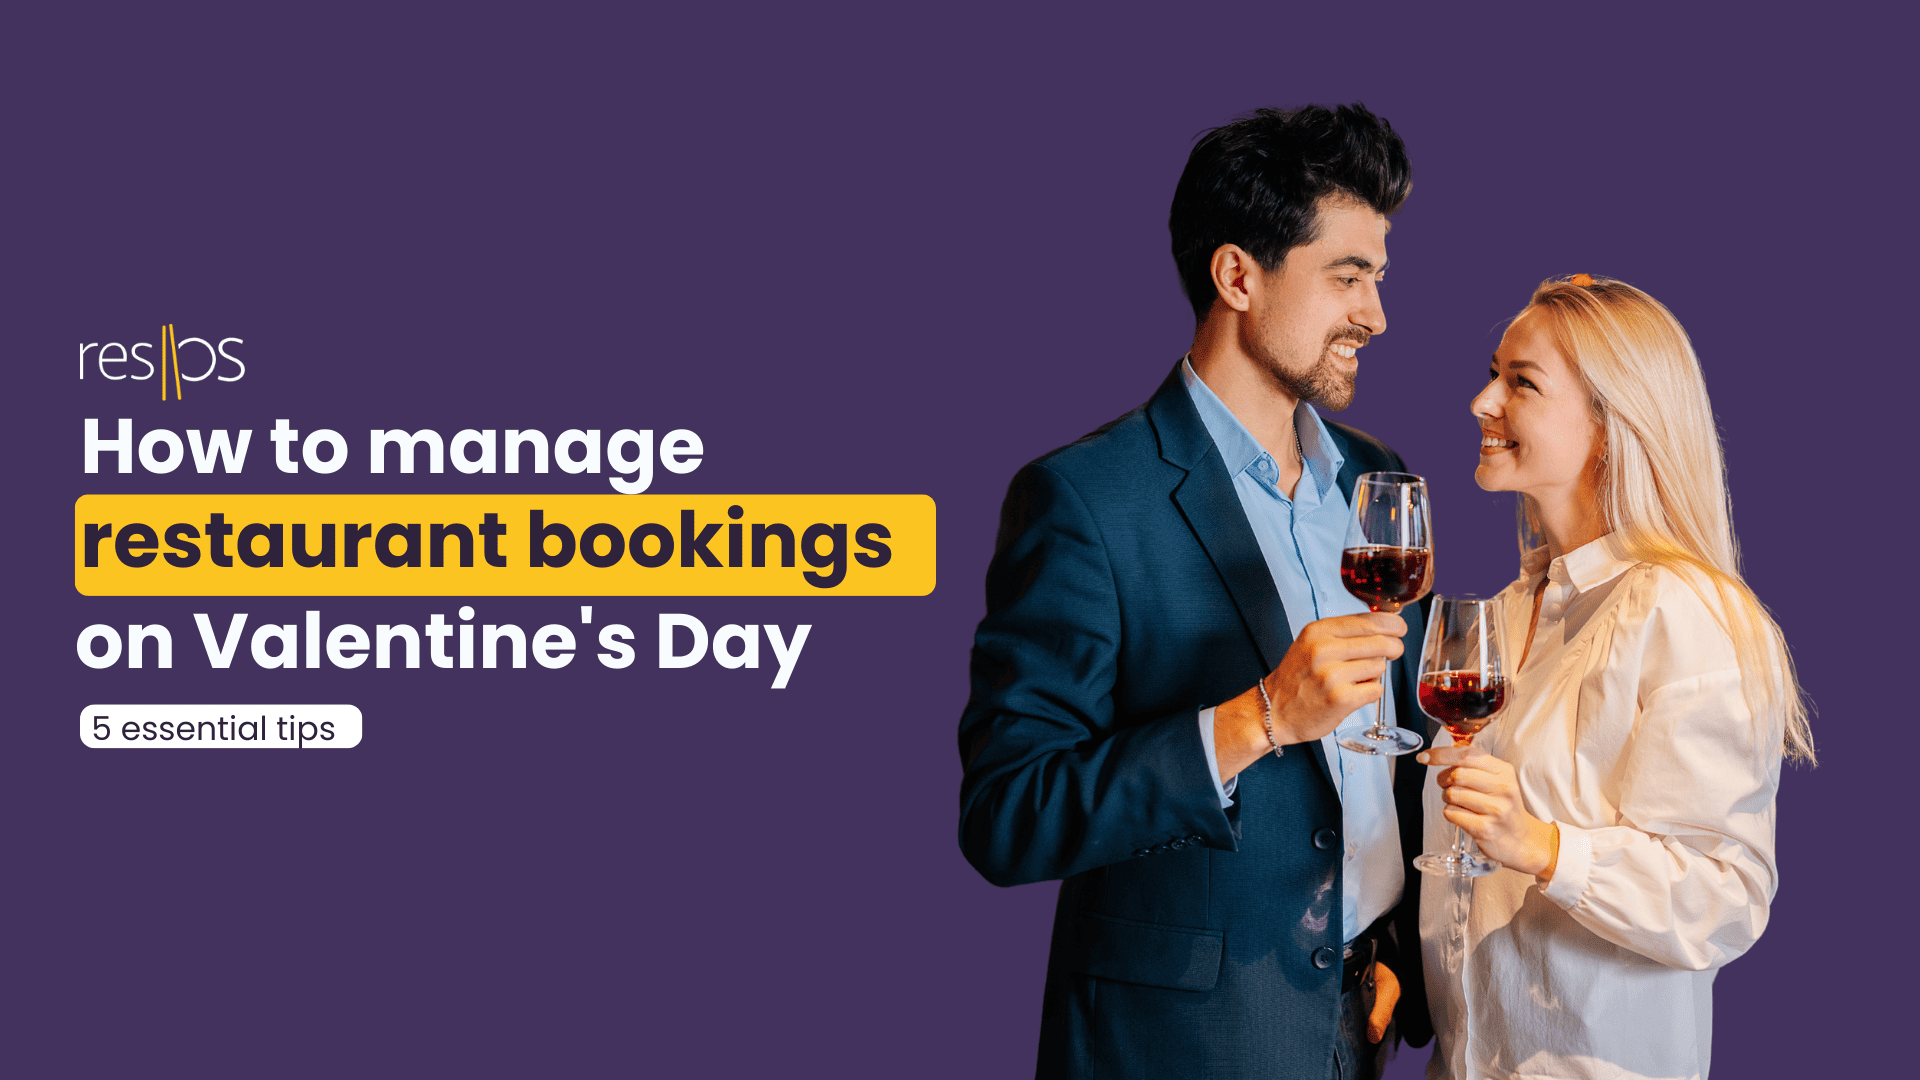 How to manage restaurant bookings on Valentine’s Day